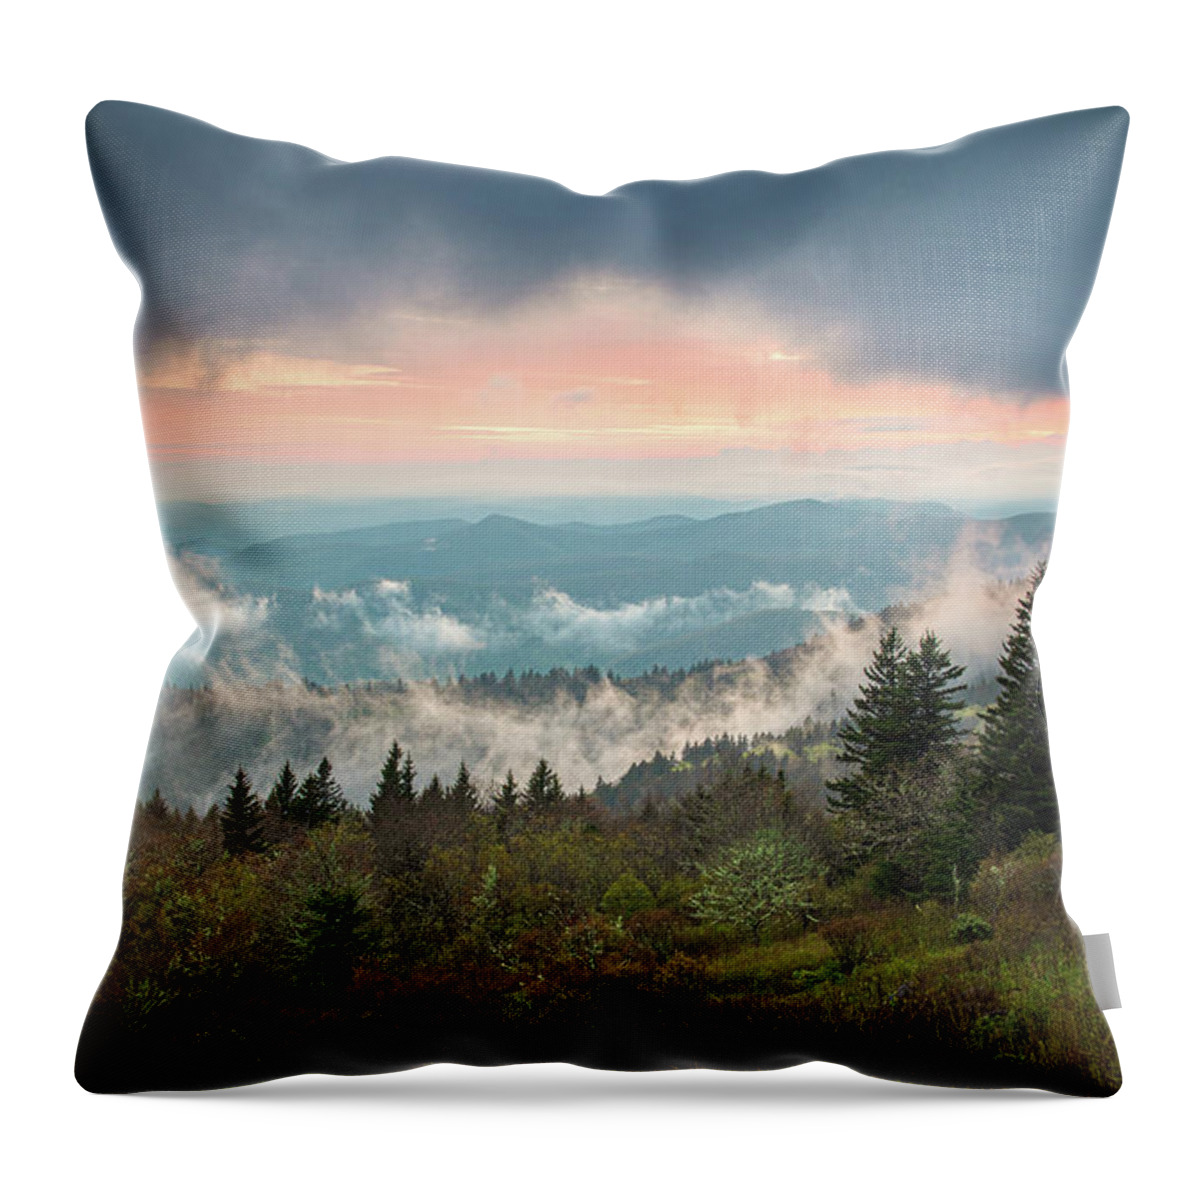 Sunset Throw Pillow featuring the photograph Blue Ridge Parkway North Carolina After The Storm by Robert Stephens